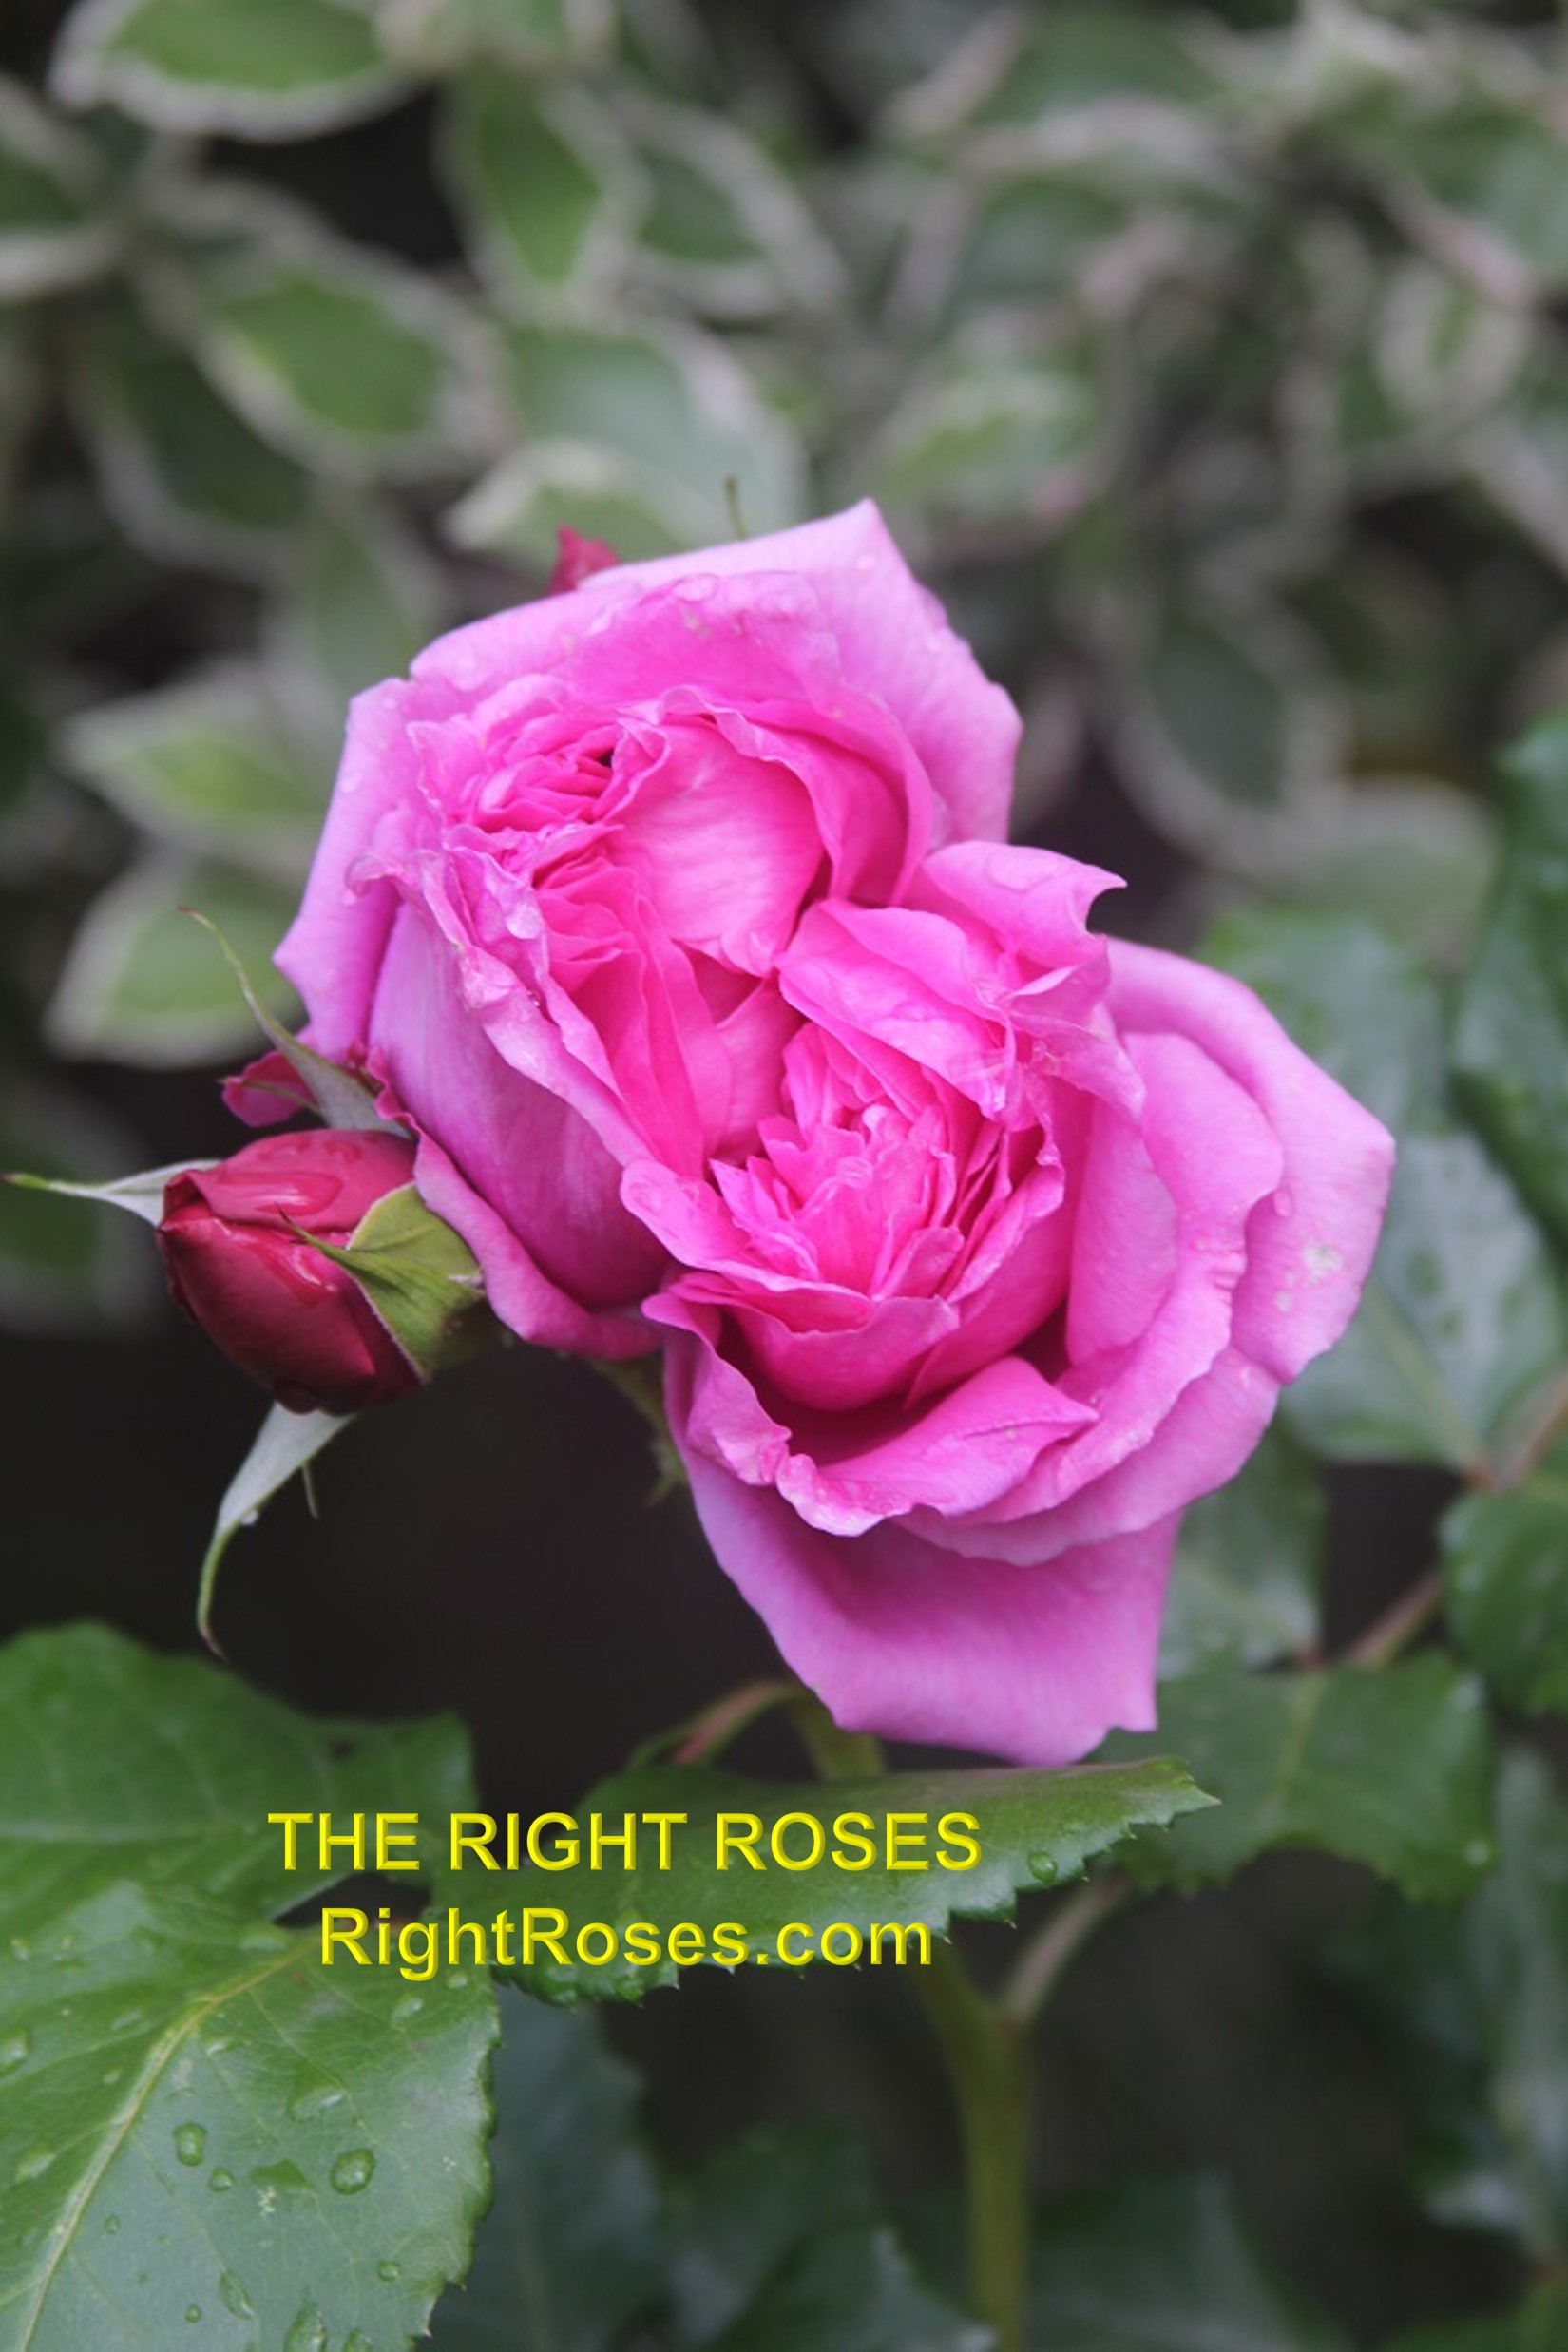 The Right Roses presents you with the best rose review of rose Pompadour | Georges Delbard 2015. Millions of gardeners from all over the world have trusted our in-depth reviews. The Right Roses team uses our own, bespoke The Right Roses Score, which is the most comprehensive rose rating system in the world, to assess the overall quality of a rose. We review all the very best roses from all the best rose breeders such as Rosen Kordes, Rosen Tantau, Delbard, David Austin Roses. The Right Roses is also running the best gardening club for the very best connoisseur gardeners and garden designers at Righttify.com. At Righttify.com, connoisseur sellers can design gardens, provide gardening services, sell new garden plants, resell pre-loved garden plants. In addition, buyers can buy the very best plants in the world.